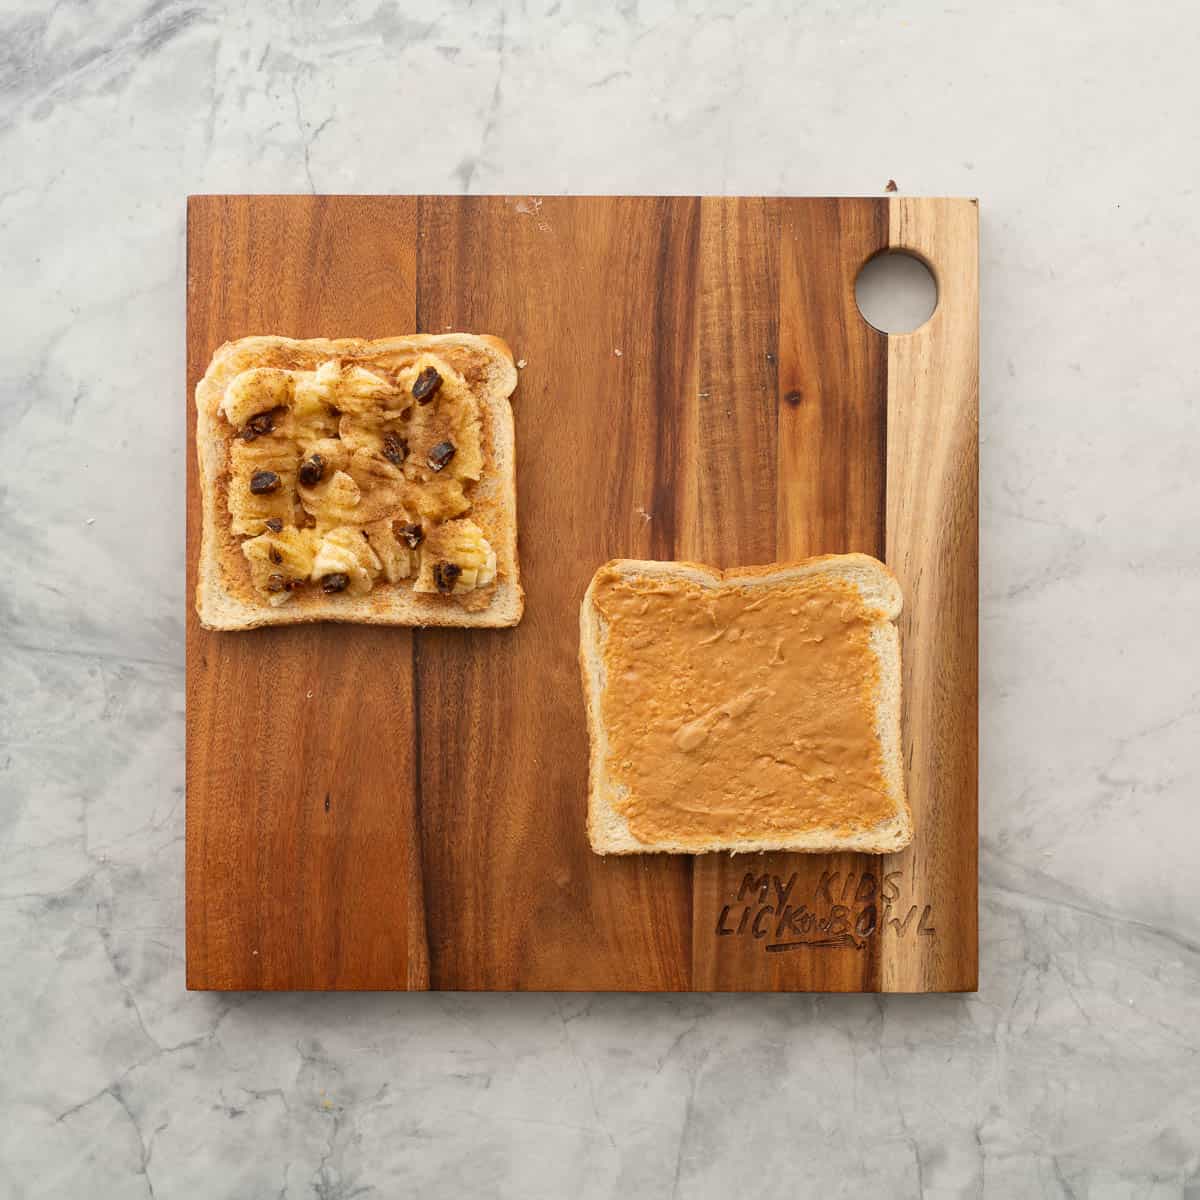 One slice of bread layered with peanut butter, banana and dates and sprinkled with cinnamon resting on a chopping board next to one other slice of bread which is spread with peanut butter. 